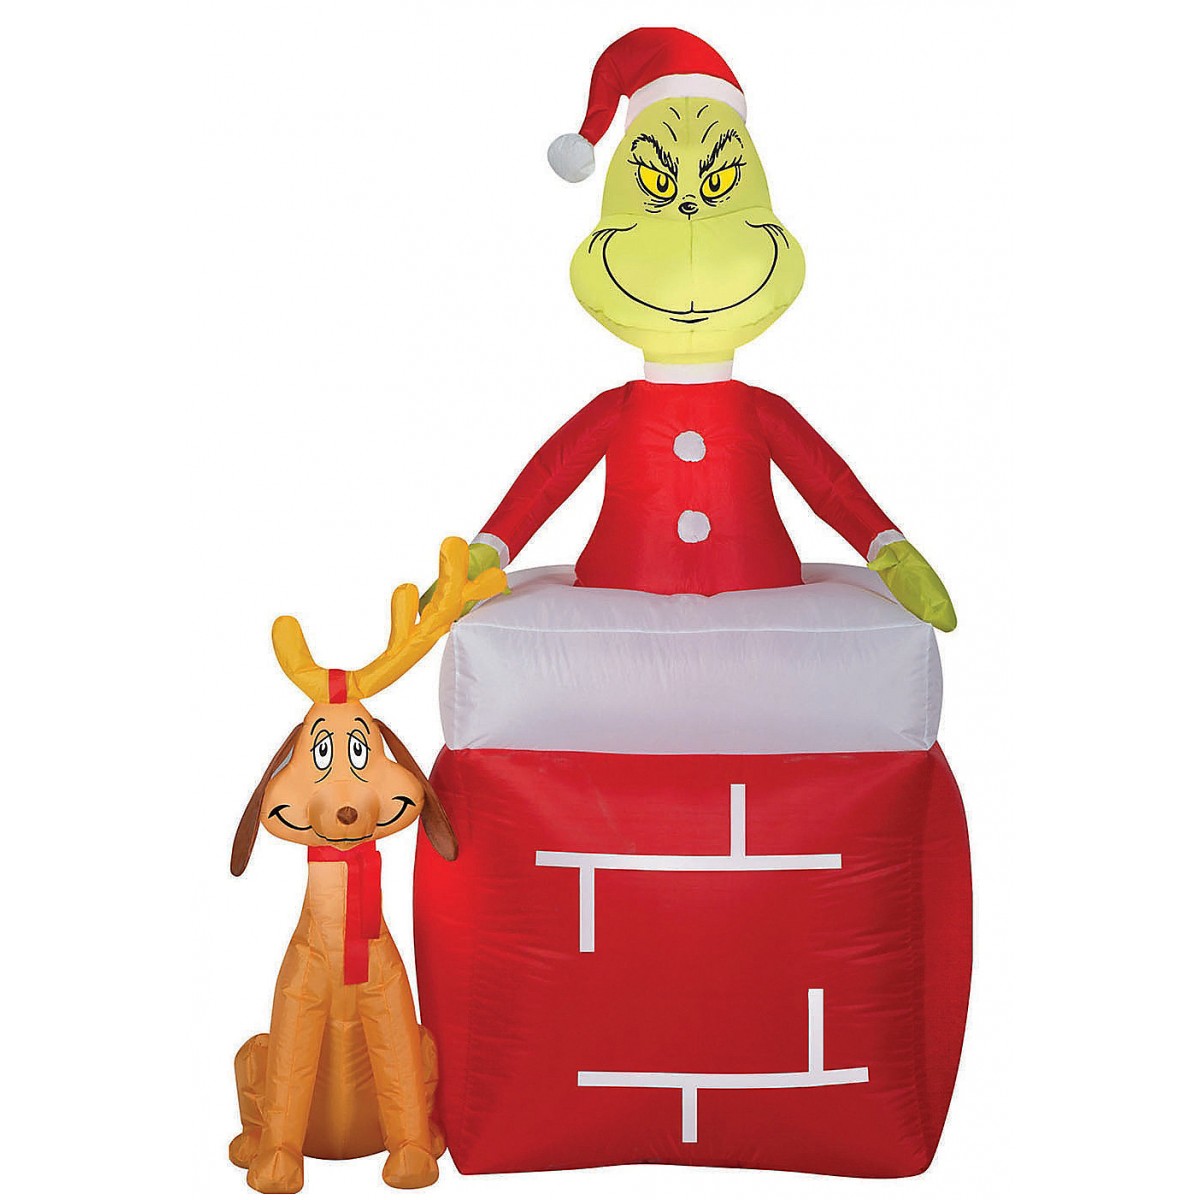 https://www.cosplaycostumecloset.com/image/cache/catalog/morris-ot/66-blow-up-inflatable-dr-seuss-the-grinch-and-max-outdoor-yard-decoration~ss116740g-1200x1200.jpg